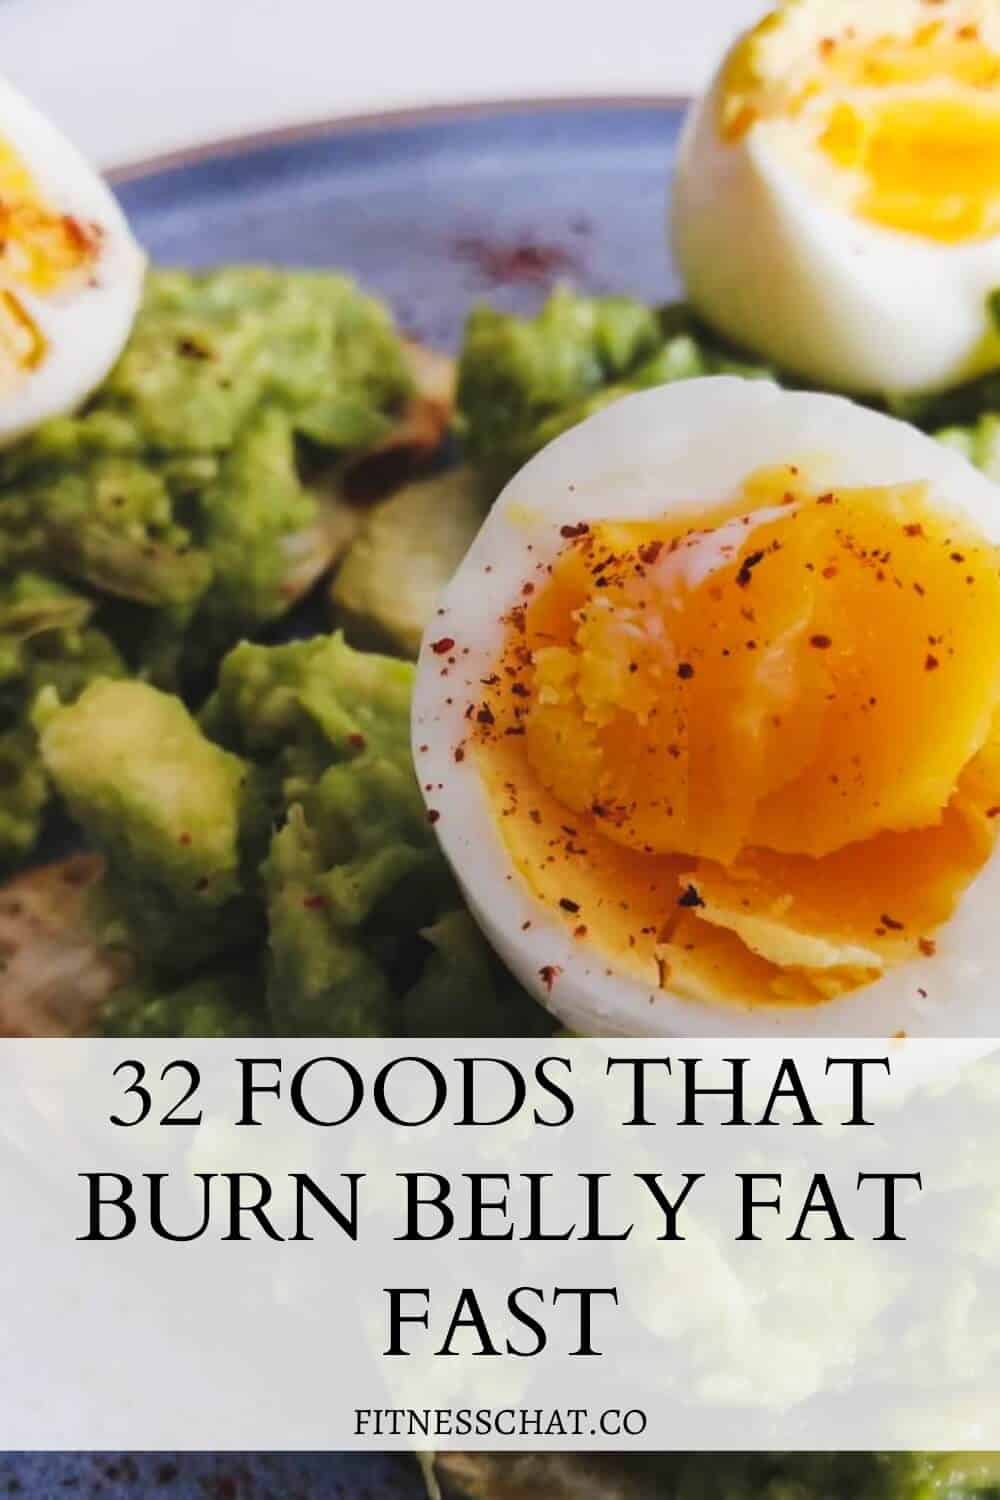 32 foods that burn belly fat fast- flat tummy foods and best fat brrning foods